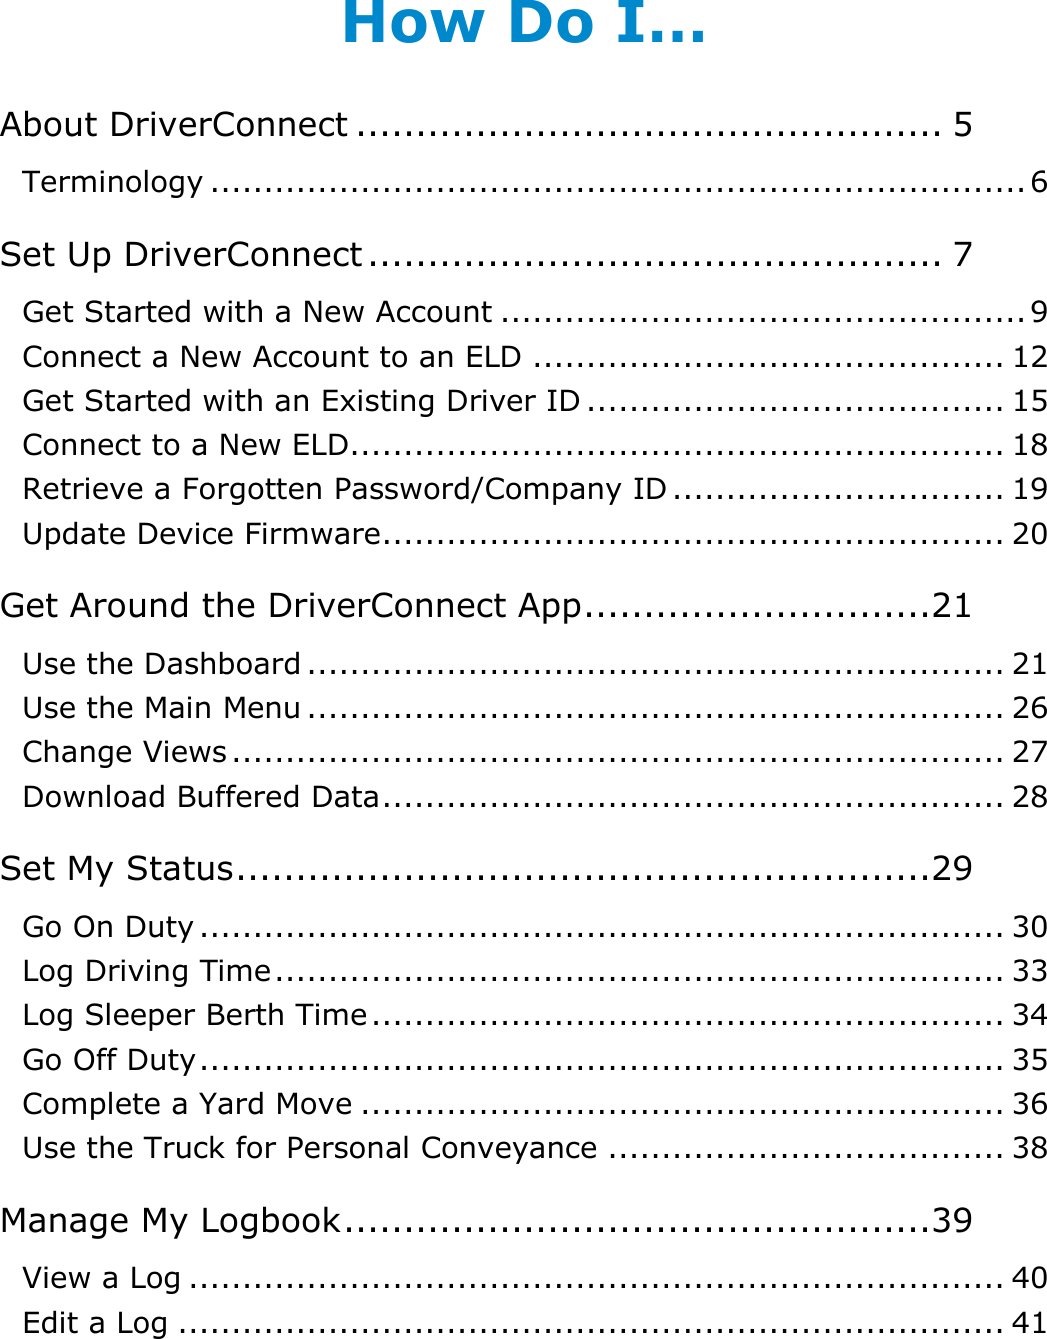 Table of Contents: How Do I…? DriverConnect User Guide  2 © 2017, Rand McNally, Inc. How Do I… About DriverConnect ................................................. 5 Terminology ............................................................................ 6 Set Up DriverConnect ................................................ 7 Get Started with a New Account ................................................. 9 Connect a New Account to an ELD ............................................ 12 Get Started with an Existing Driver ID ....................................... 15 Connect to a New ELD ............................................................. 18 Retrieve a Forgotten Password/Company ID ............................... 19 Update Device Firmware .......................................................... 20 Get Around the DriverConnect App .............................21 Use the Dashboard ................................................................. 21 Use the Main Menu ................................................................. 26 Change Views ........................................................................ 27 Download Buffered Data .......................................................... 28 Set My Status ..........................................................29 Go On Duty ........................................................................... 30 Log Driving Time .................................................................... 33 Log Sleeper Berth Time ........................................................... 34 Go Off Duty ........................................................................... 35 Complete a Yard Move ............................................................ 36 Use the Truck for Personal Conveyance ..................................... 38 Manage My Logbook .................................................39 View a Log ............................................................................ 40 Edit a Log ............................................................................. 41 